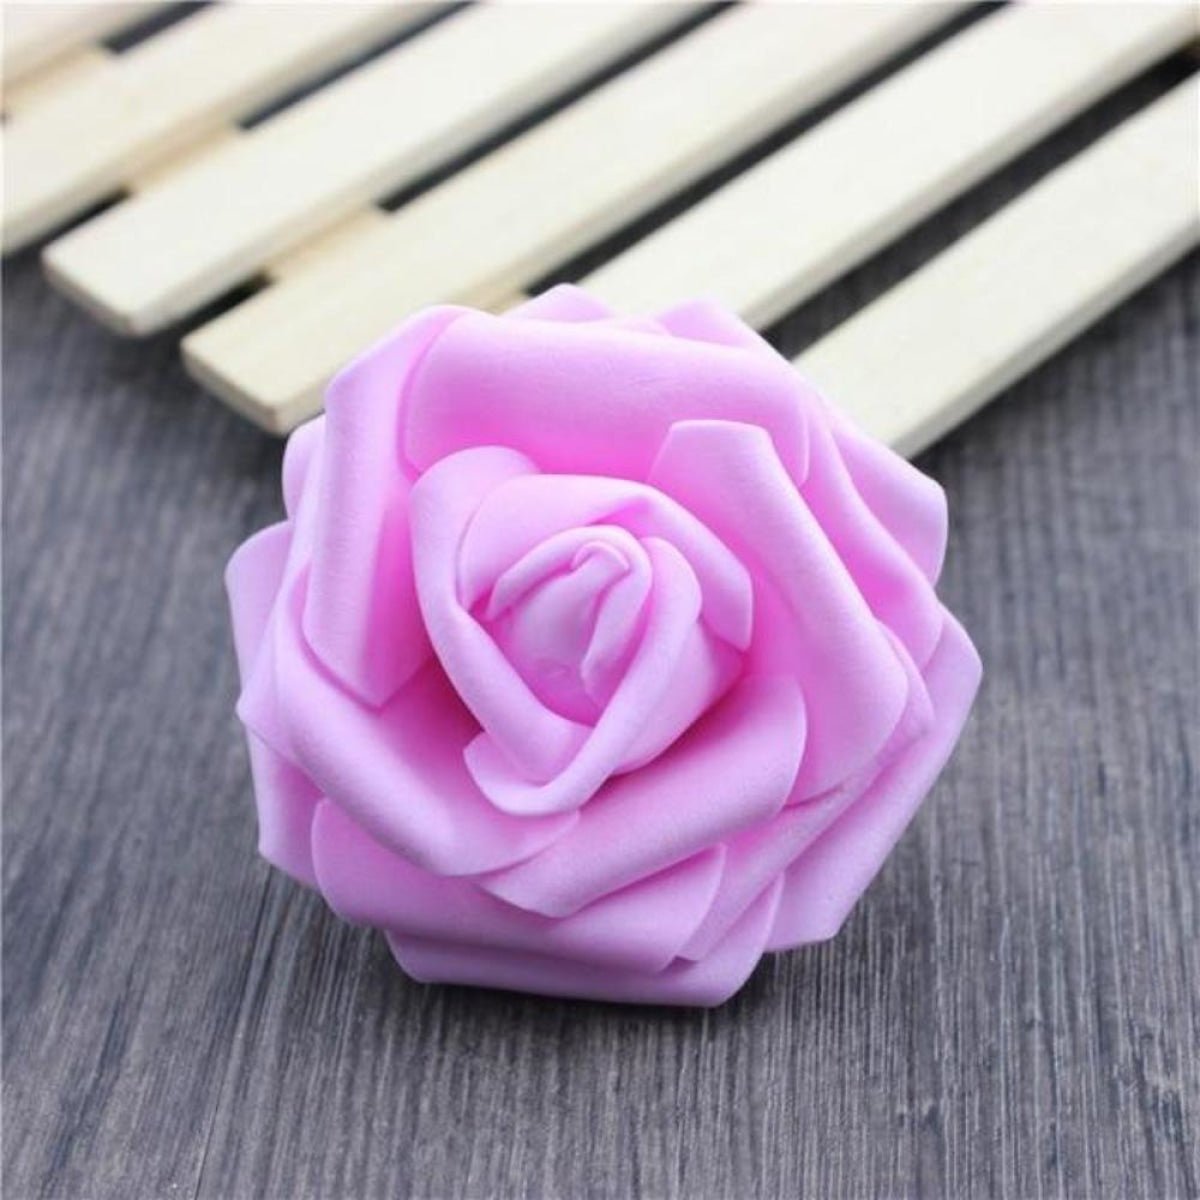 7.5cm Artificial Fake Flowers Foam Rose Head For Wedding Decorations DIY Wreaths - 40pcs Deep Pink - Asia Sell